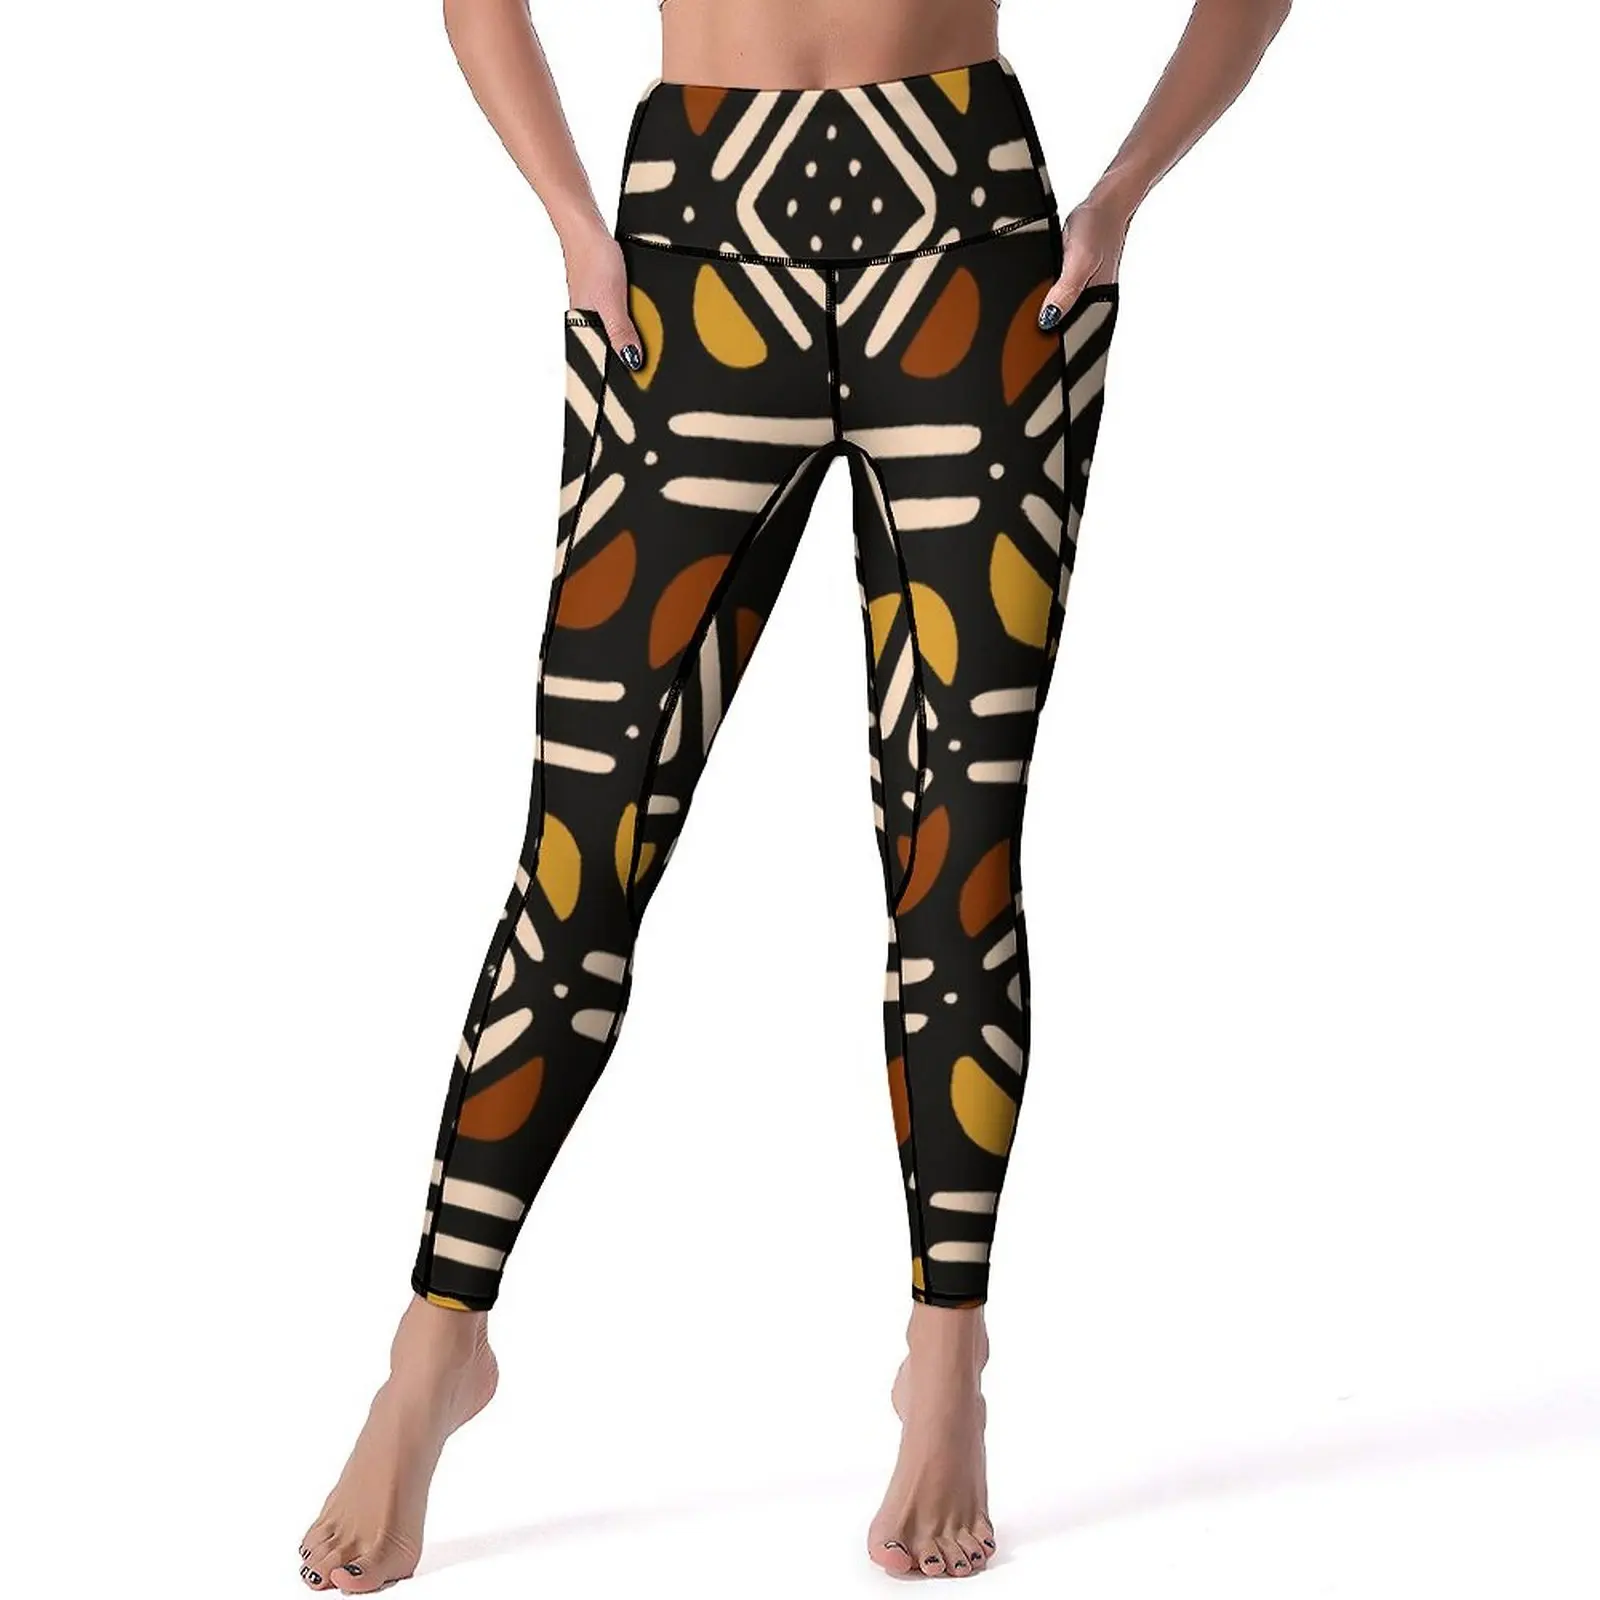 

Tribal Print Yoga Pants Sexy Vintage African Graphic Leggings Push Up Fitness Leggins Female Retro Quick-Dry Sports Tights